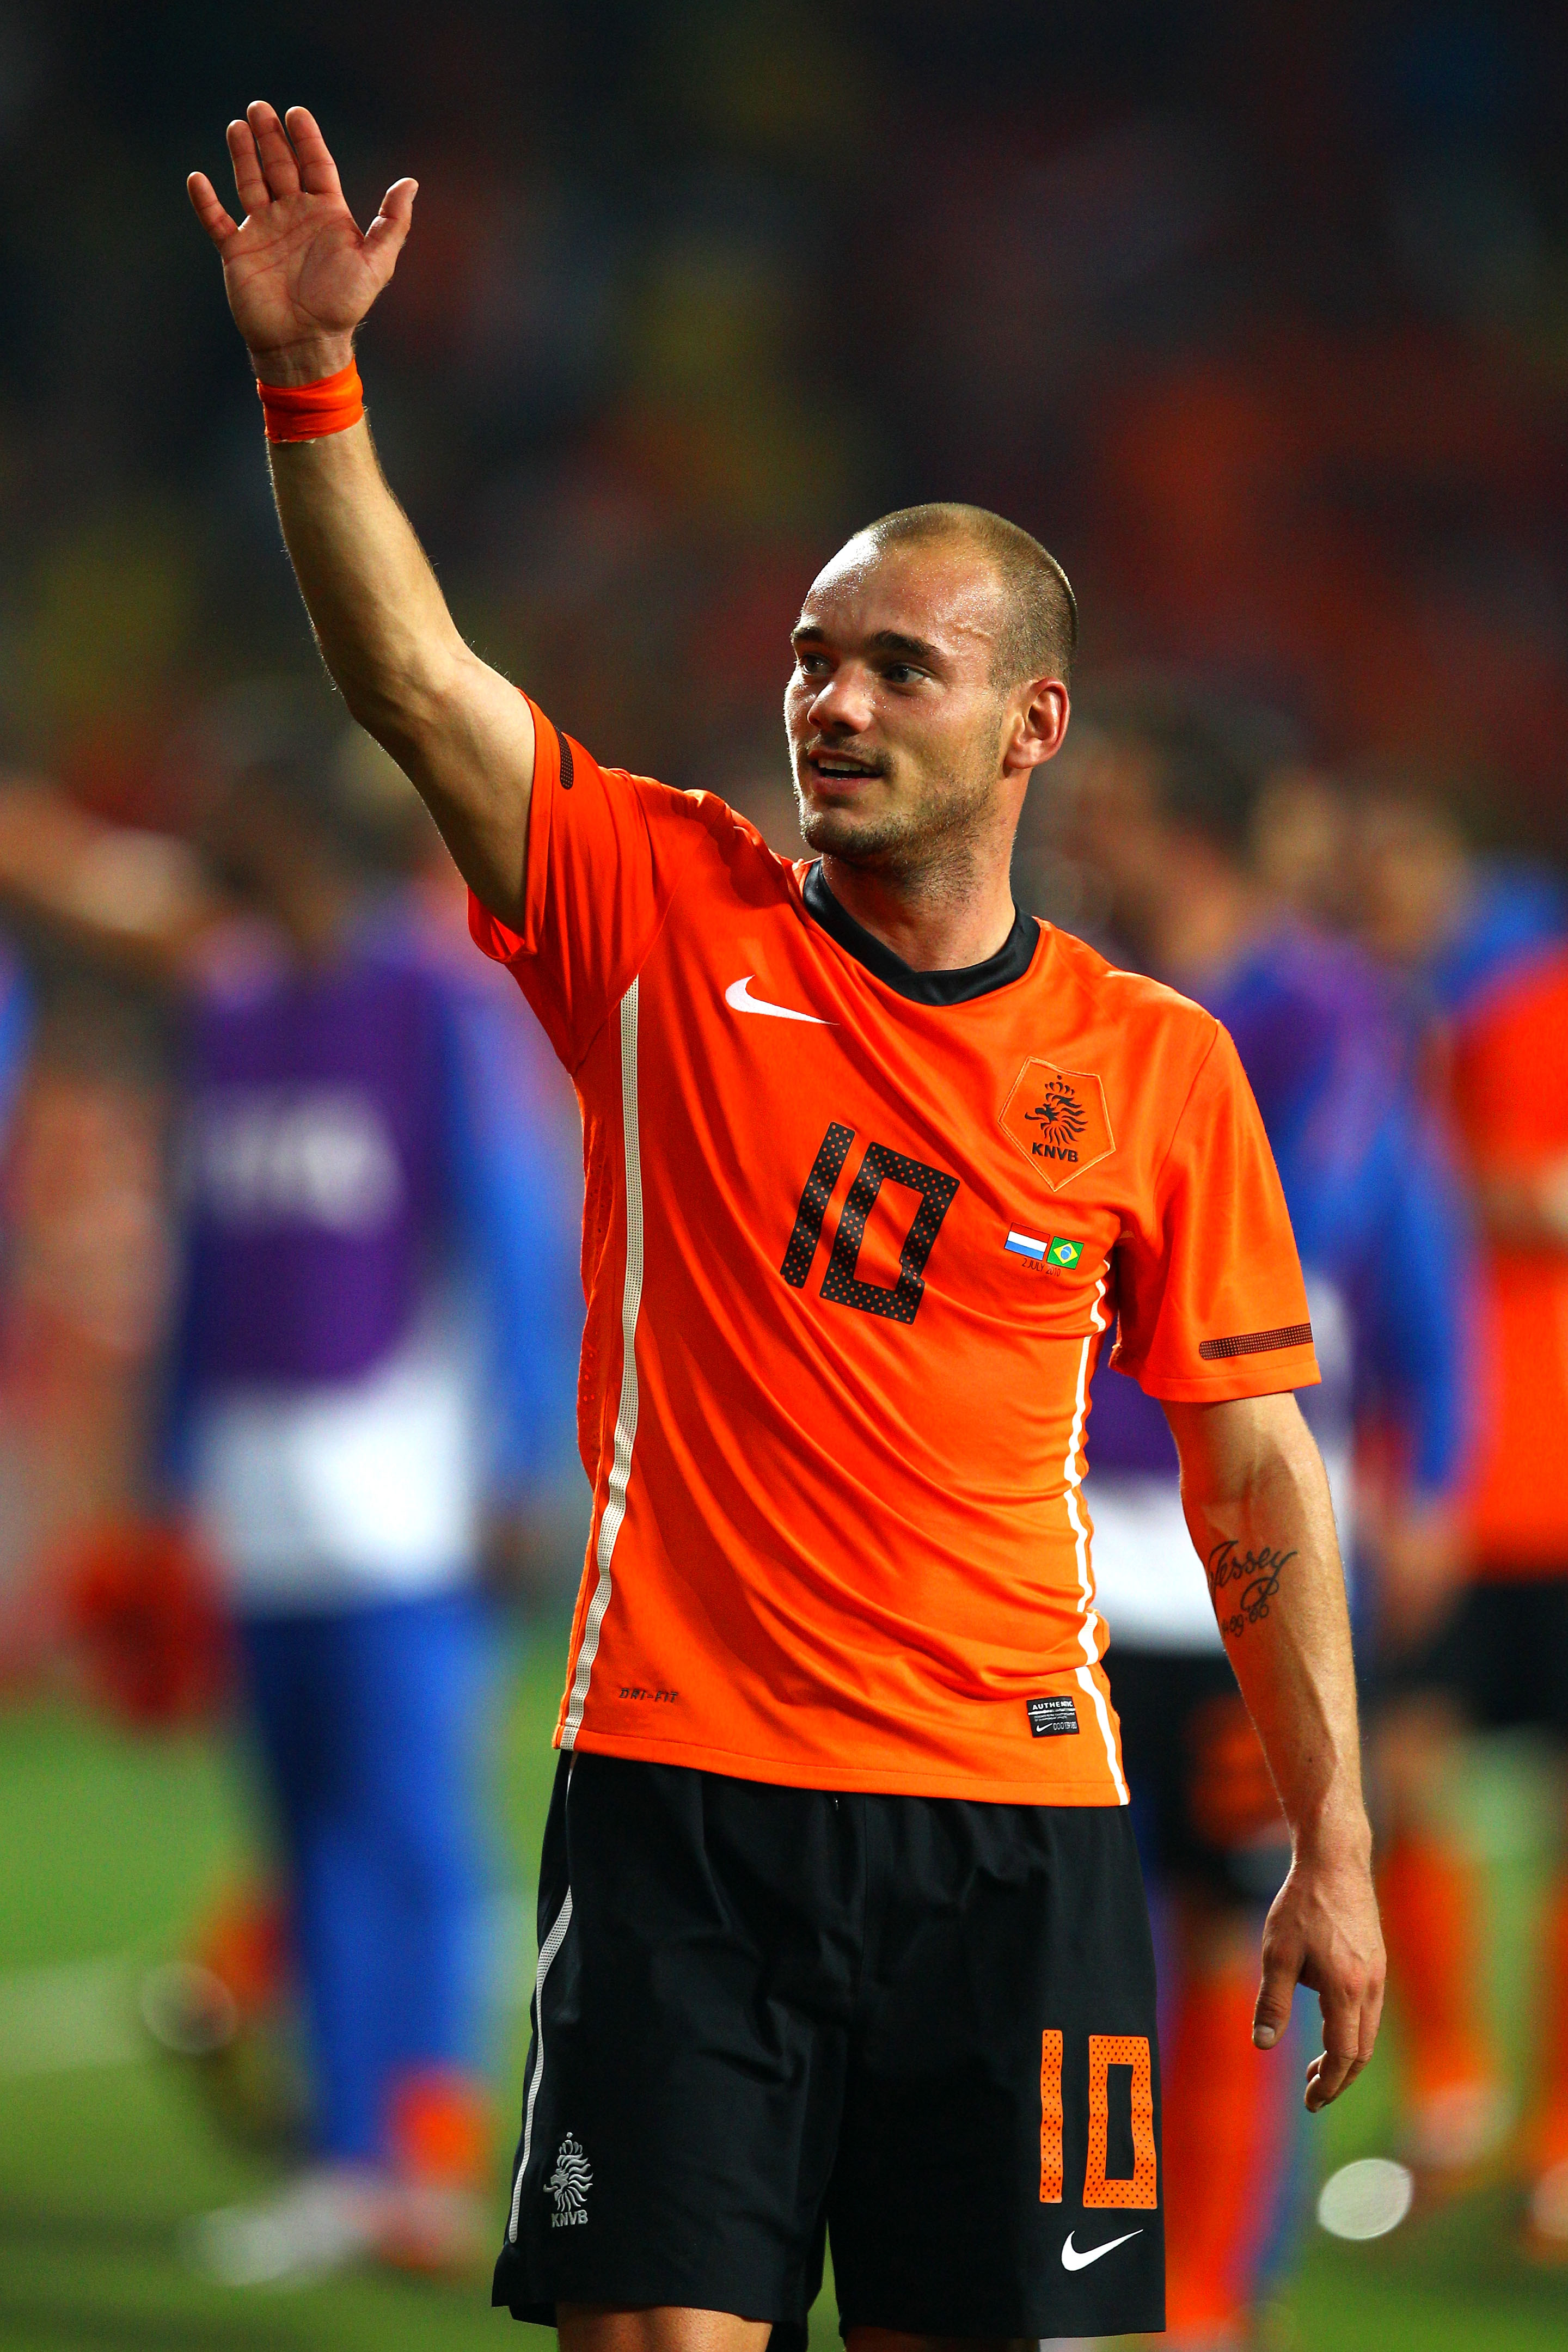 PORT ELIZABETH, SOUTH AFRICA - JULY 02:  Wesley Sneijder of the Netherlands celebrates victory following the 2010 FIFA World Cup South Africa Quarter Final match between Netherlands and Brazil at Nelson Mandela Bay Stadium on July 2, 2010 in Nelson Mandel